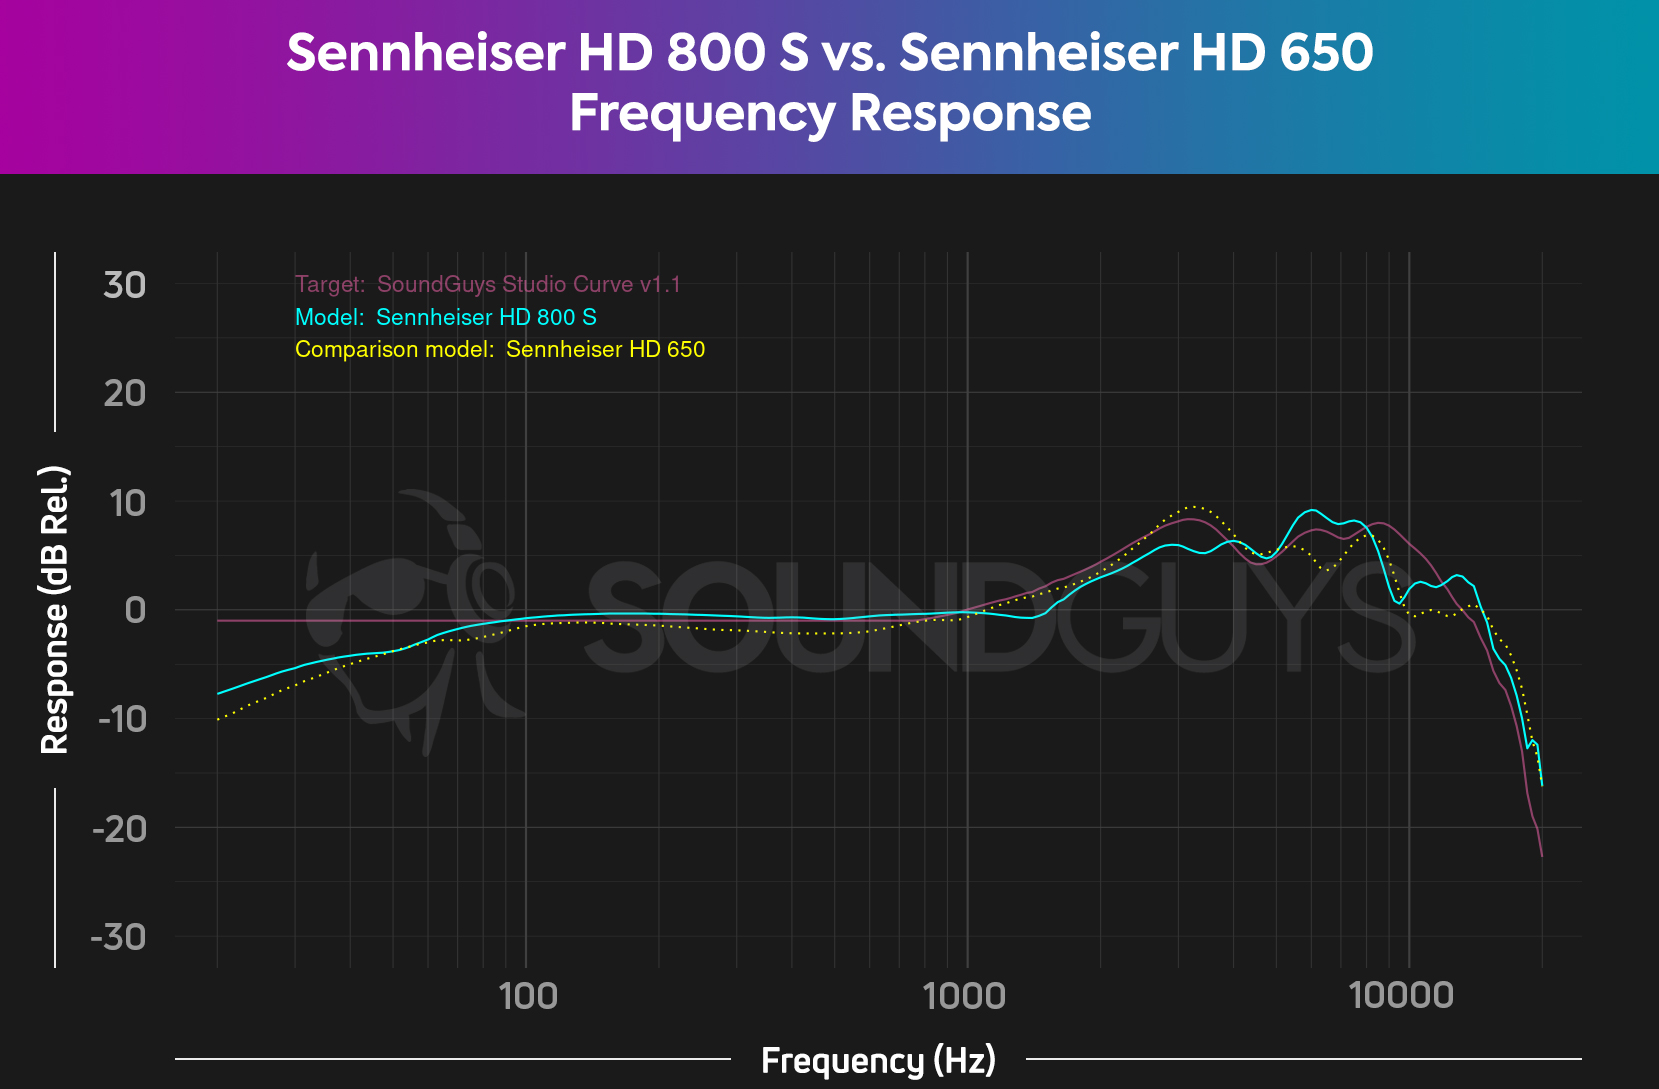 A chart showing the frequency response performance of the Sennheiser HD 800 S and the Sennheiser HD 650.